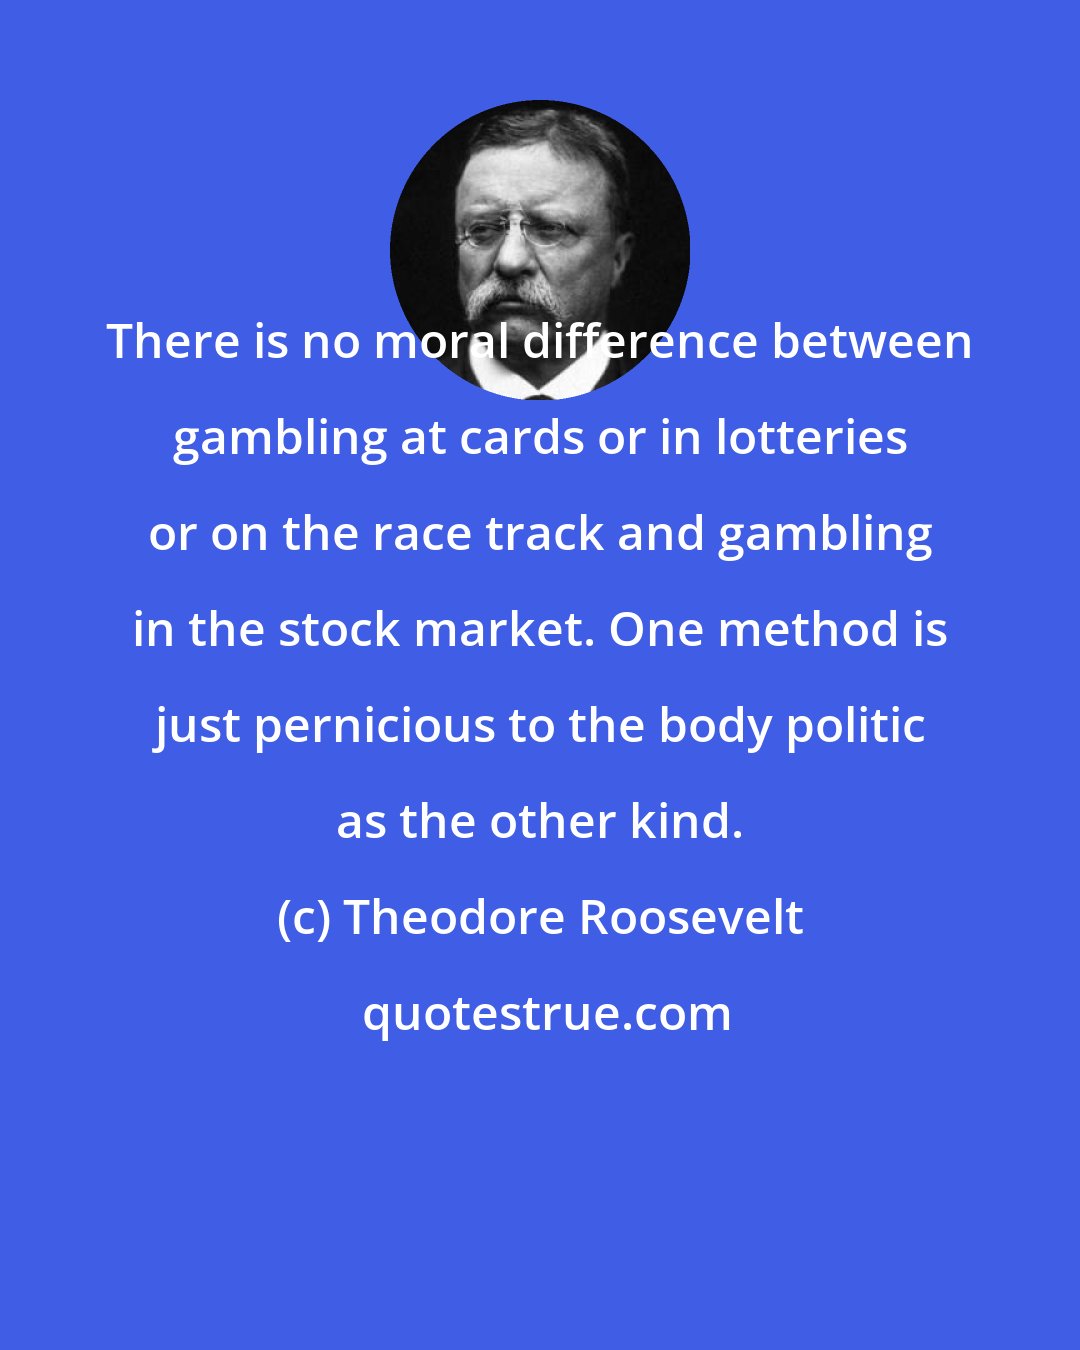 Theodore Roosevelt: There is no moral difference between gambling at cards or in lotteries or on the race track and gambling in the stock market. One method is just pernicious to the body politic as the other kind.